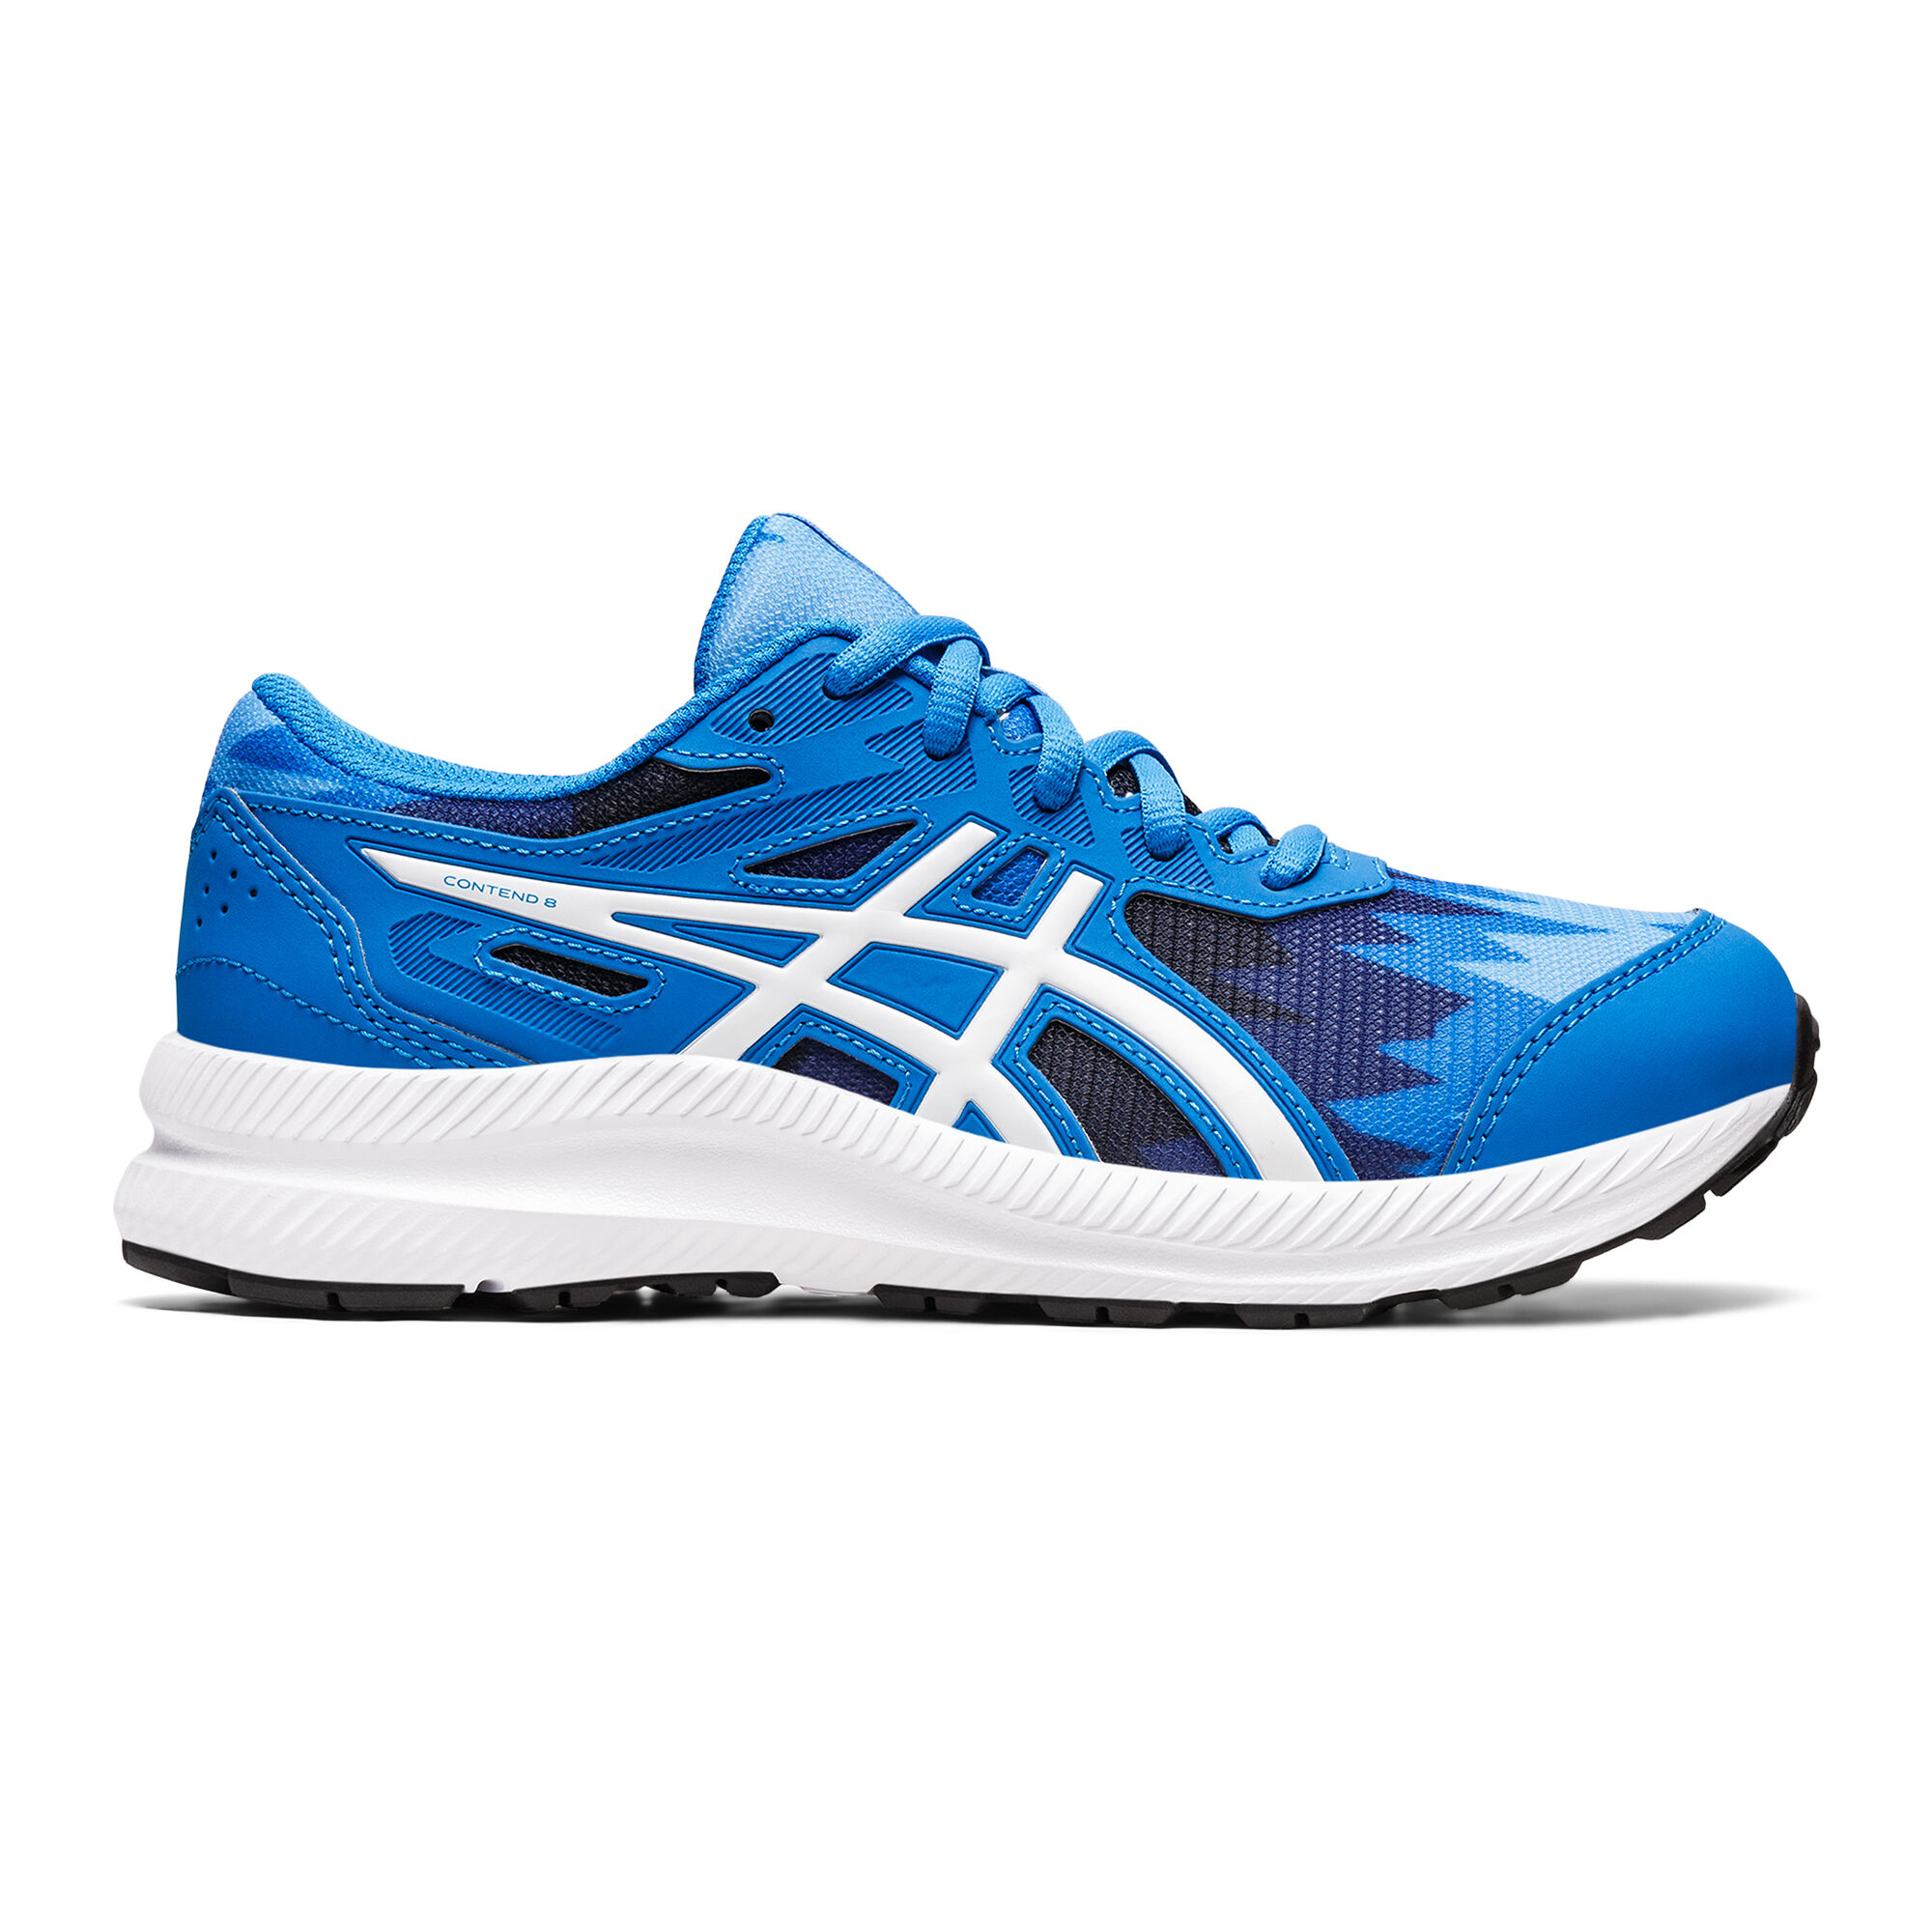 Asics Kids' CONTEND 8 Grade School Running Shoes  - Electric Blue/White - Size: 4